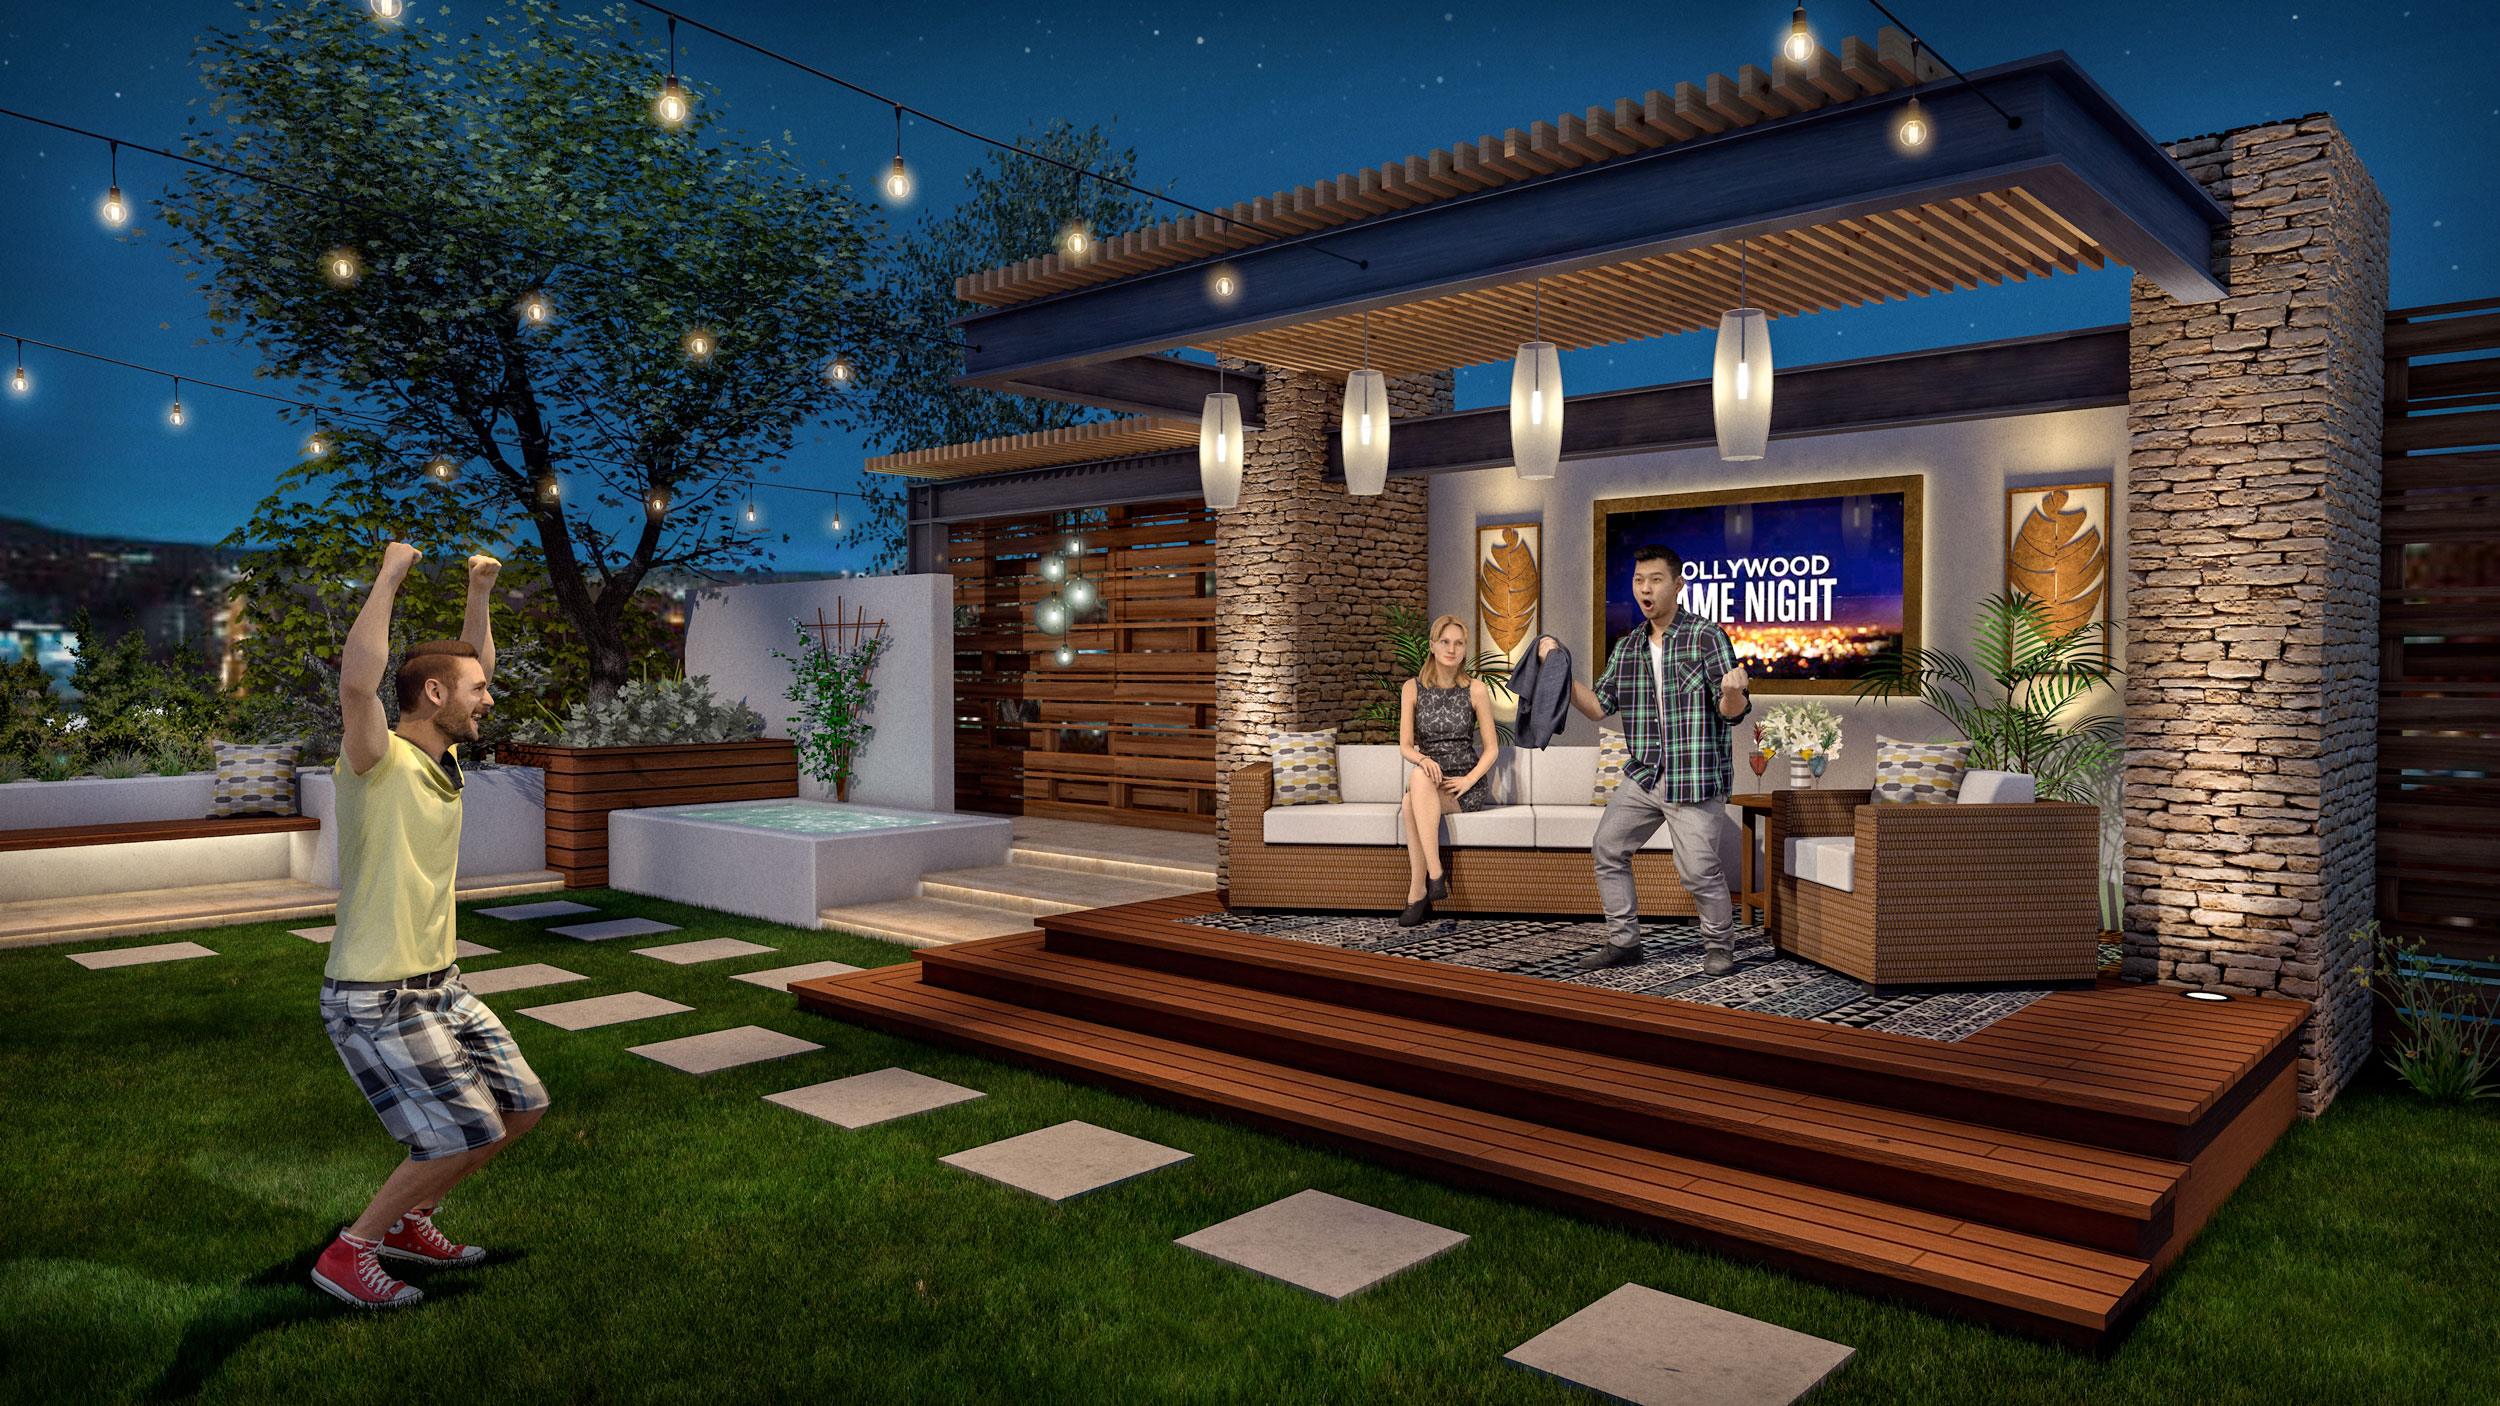 Vectorworks rendering for Hollywood Game Night tv show by Assistant Art Director Andy Broomell